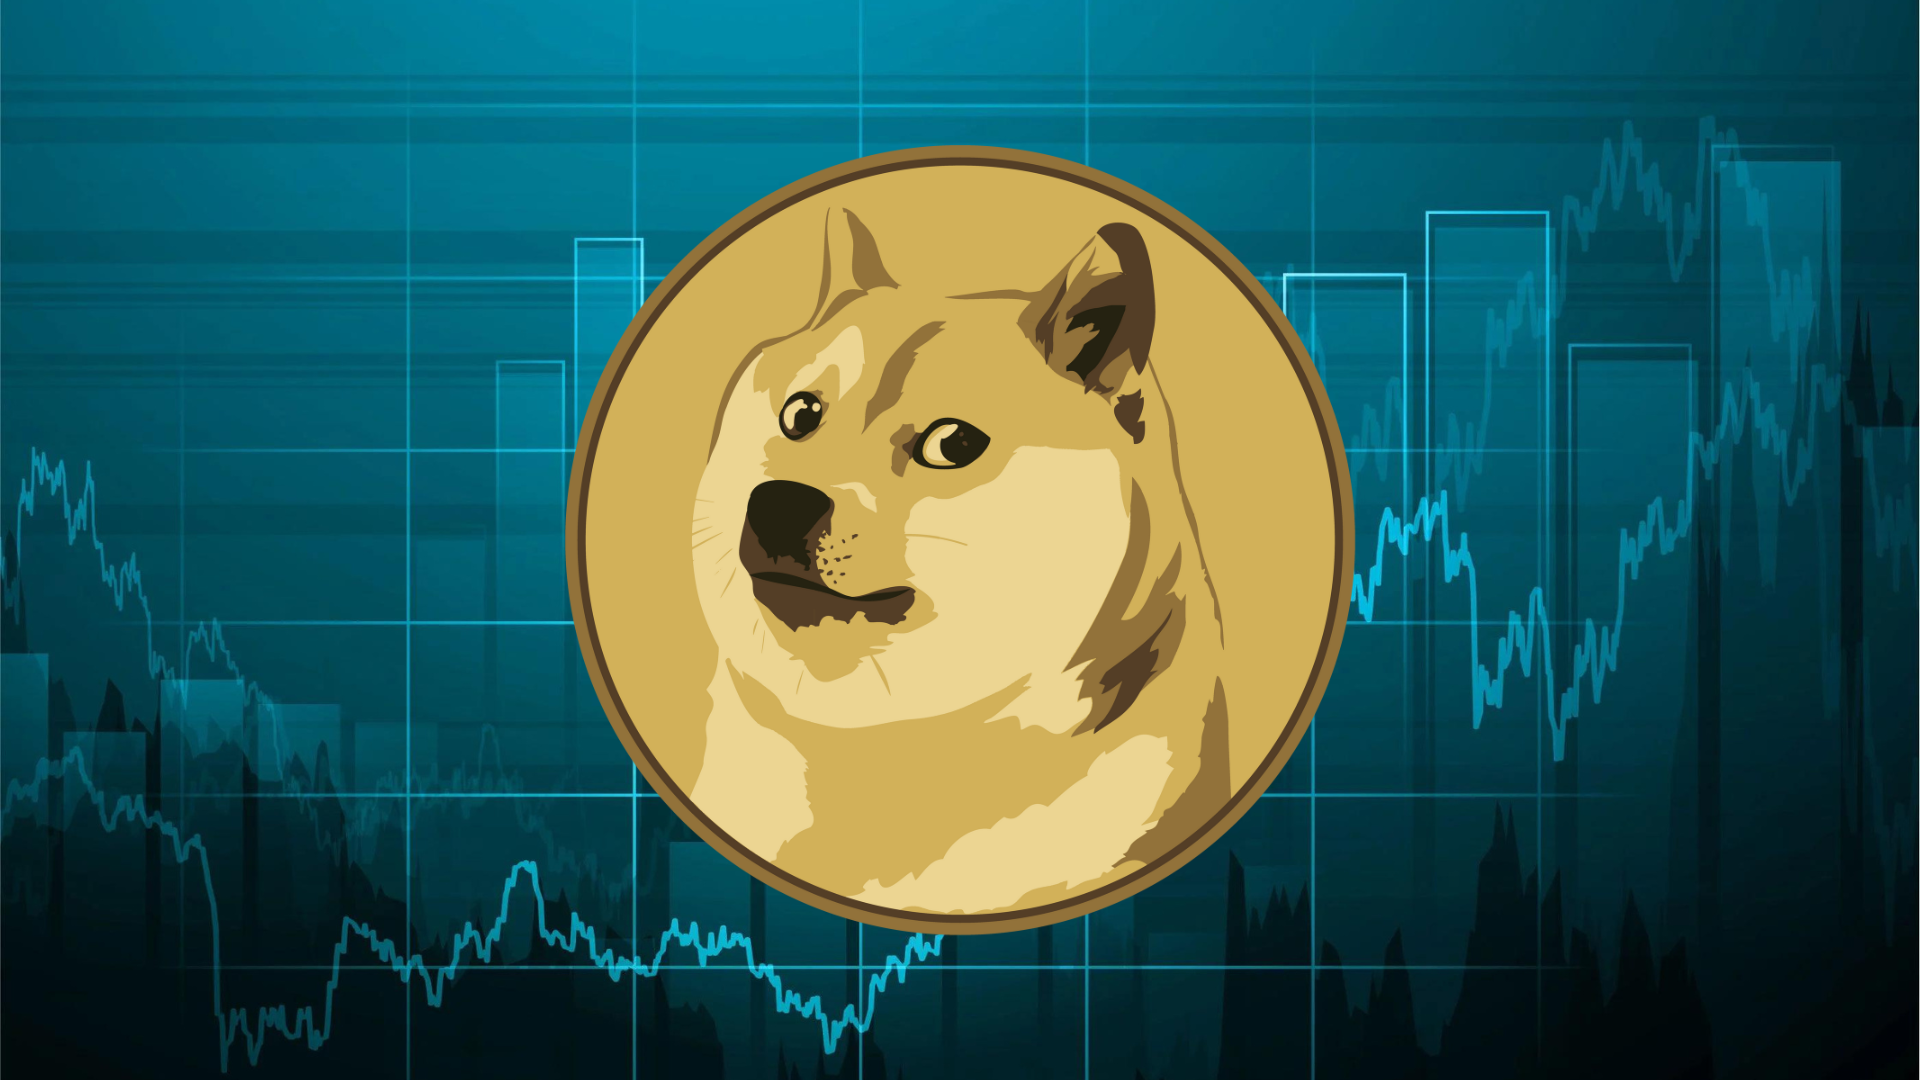 Dogecoin Price Prediction: Fake Rumor Triggers Wild DOGE Swing, But This Meme Coin Presale That’s Gunning For Pepe’s Crown Keeps Heading North